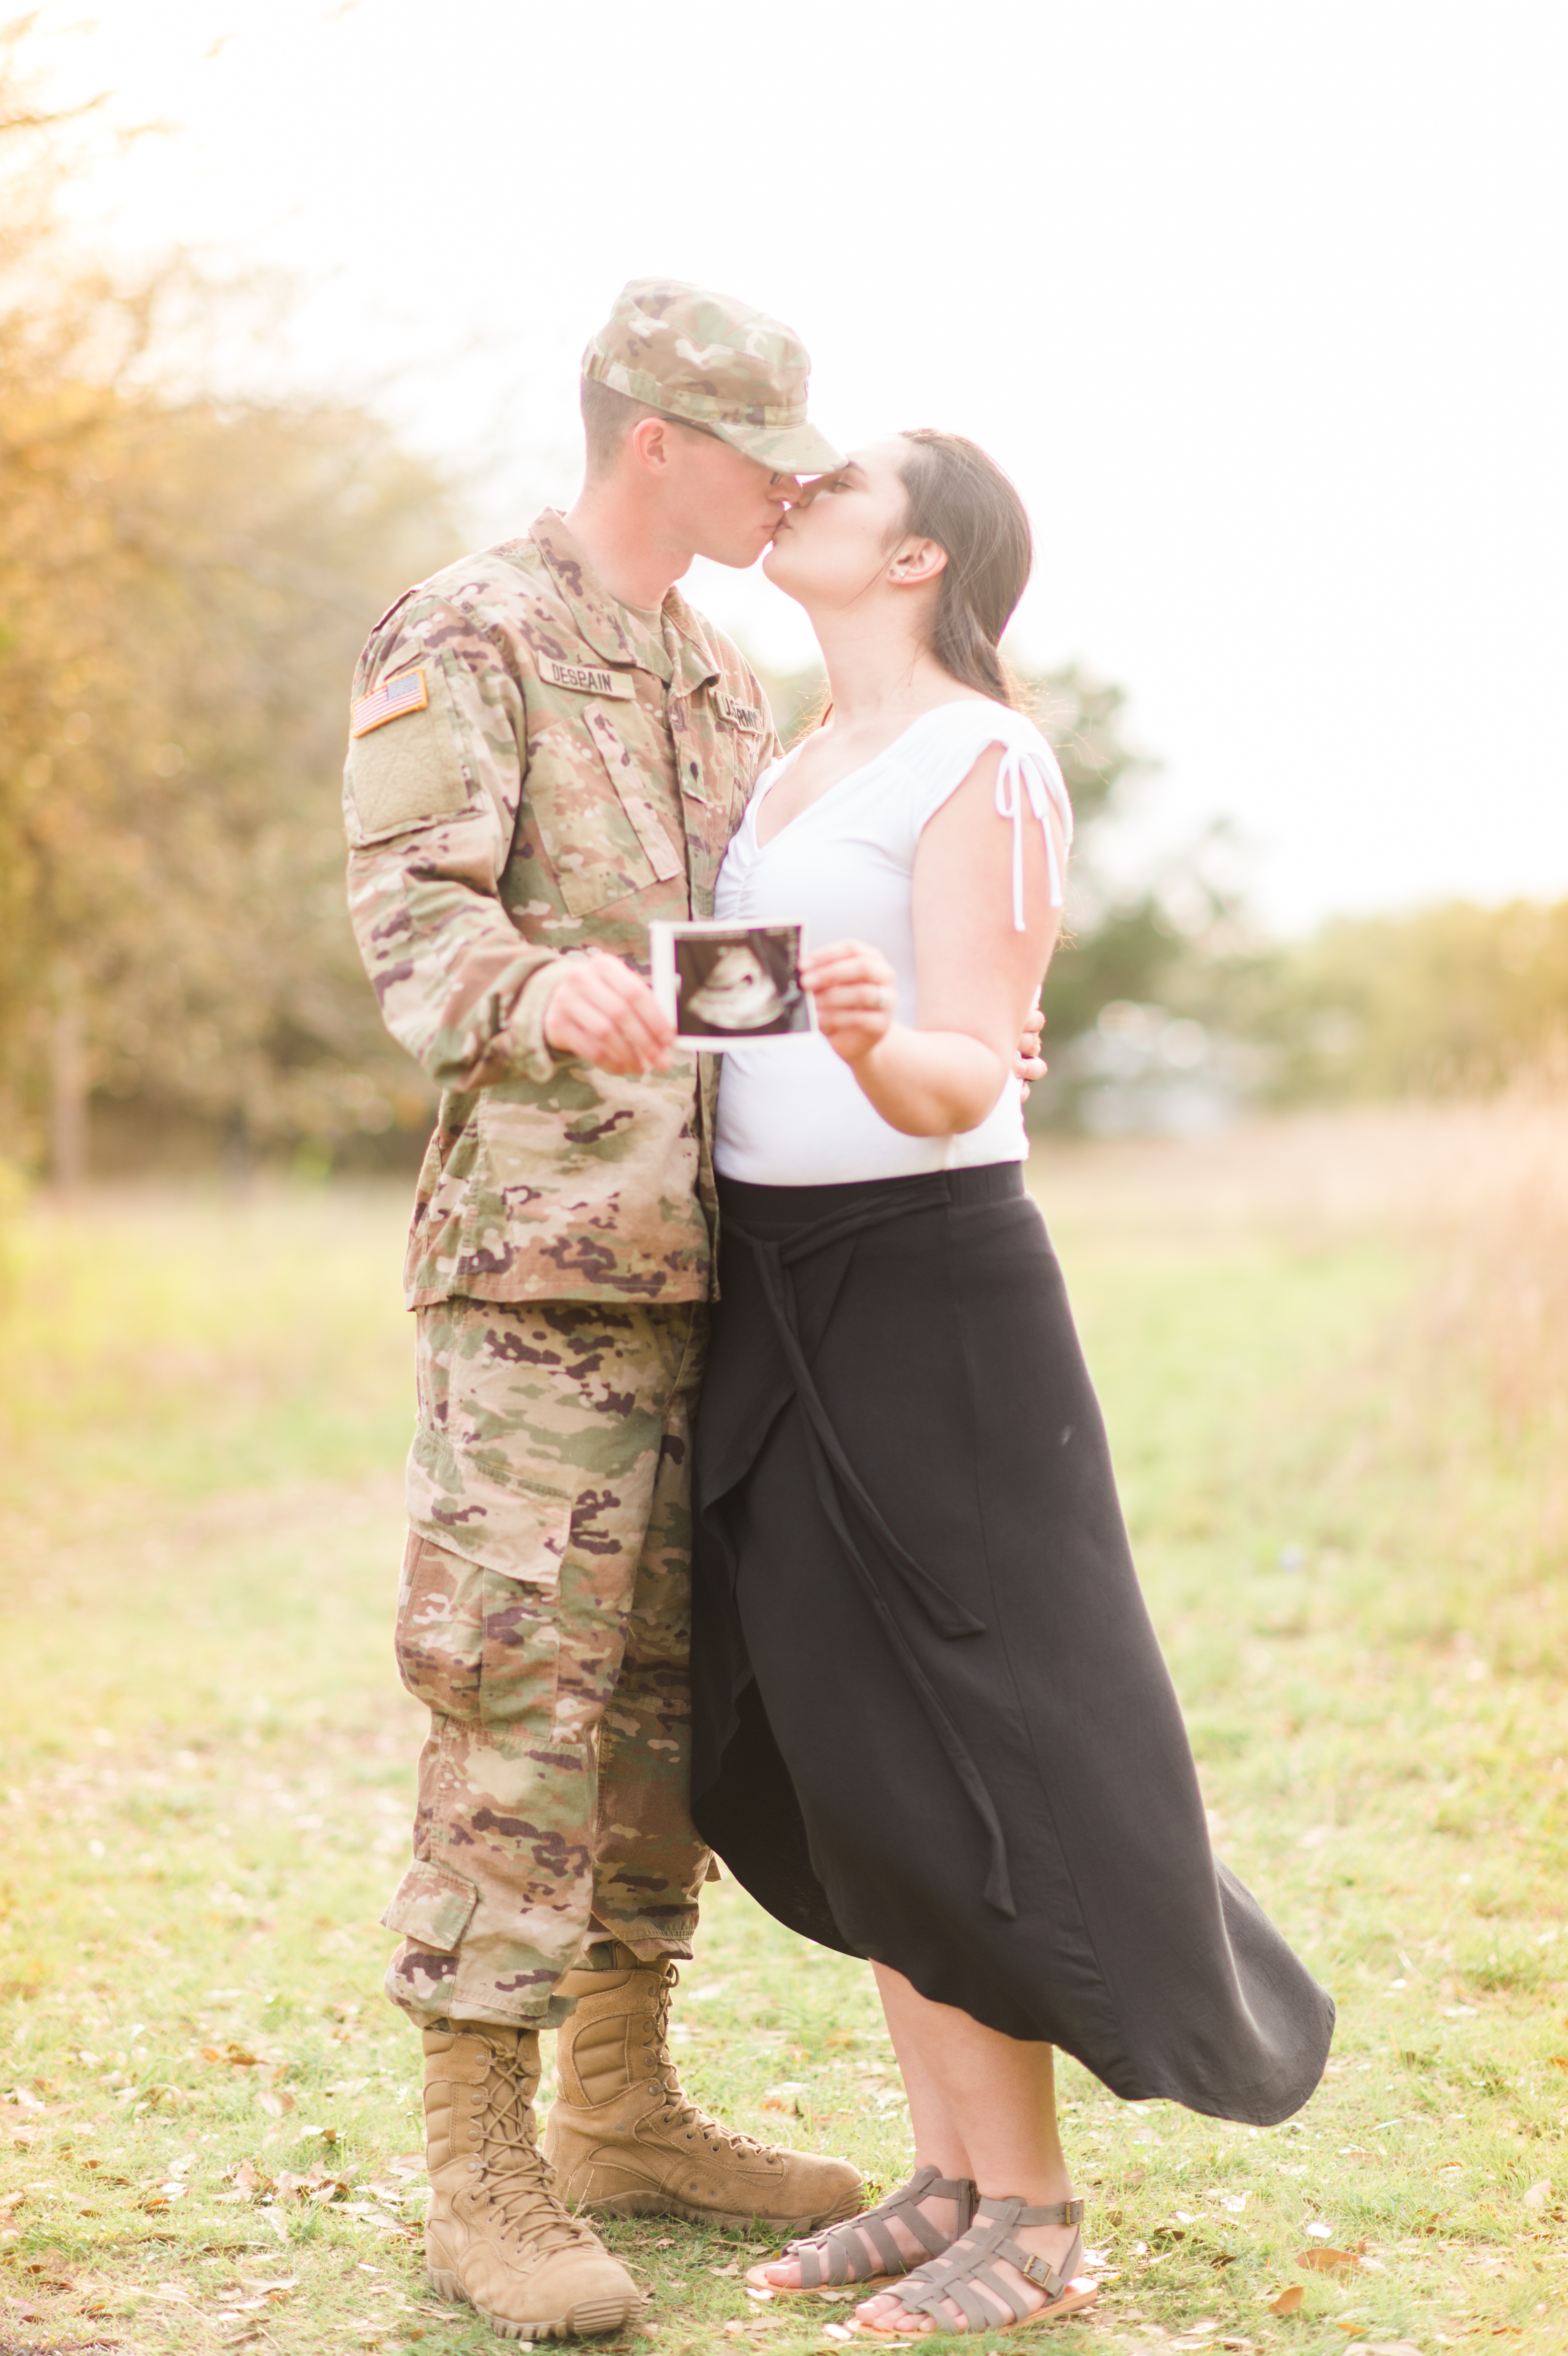 The couple gives each other a kiss as they hold their sonogram.